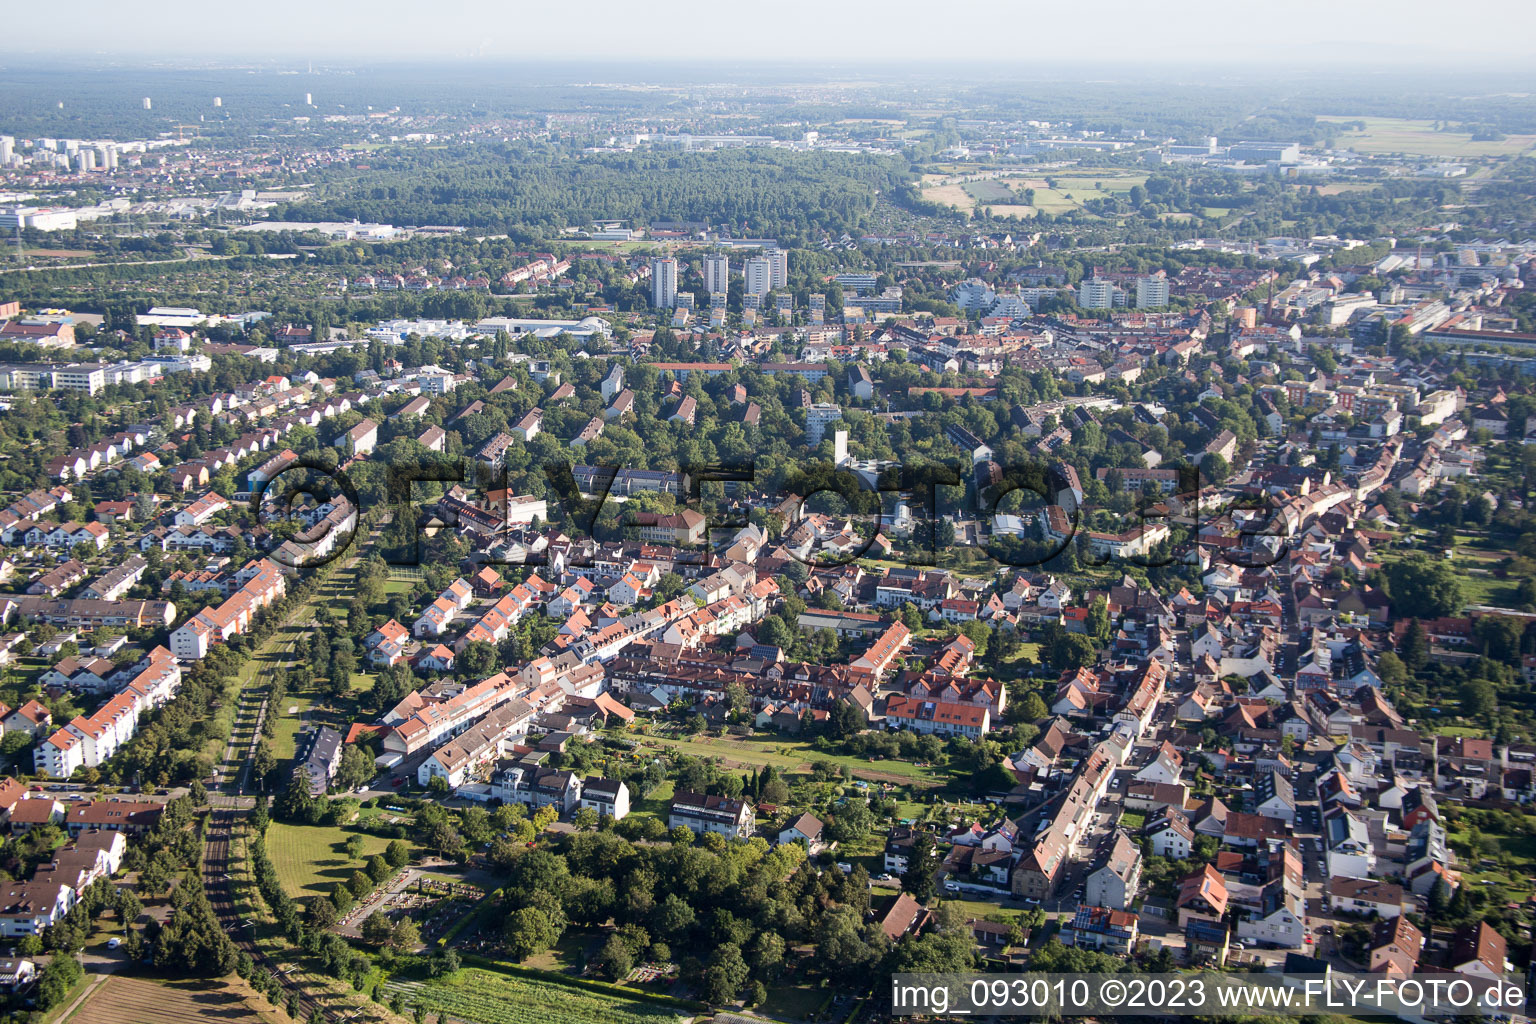 Aerial photograpy of Ouch in the district Durlach in Karlsruhe in the state Baden-Wuerttemberg, Germany